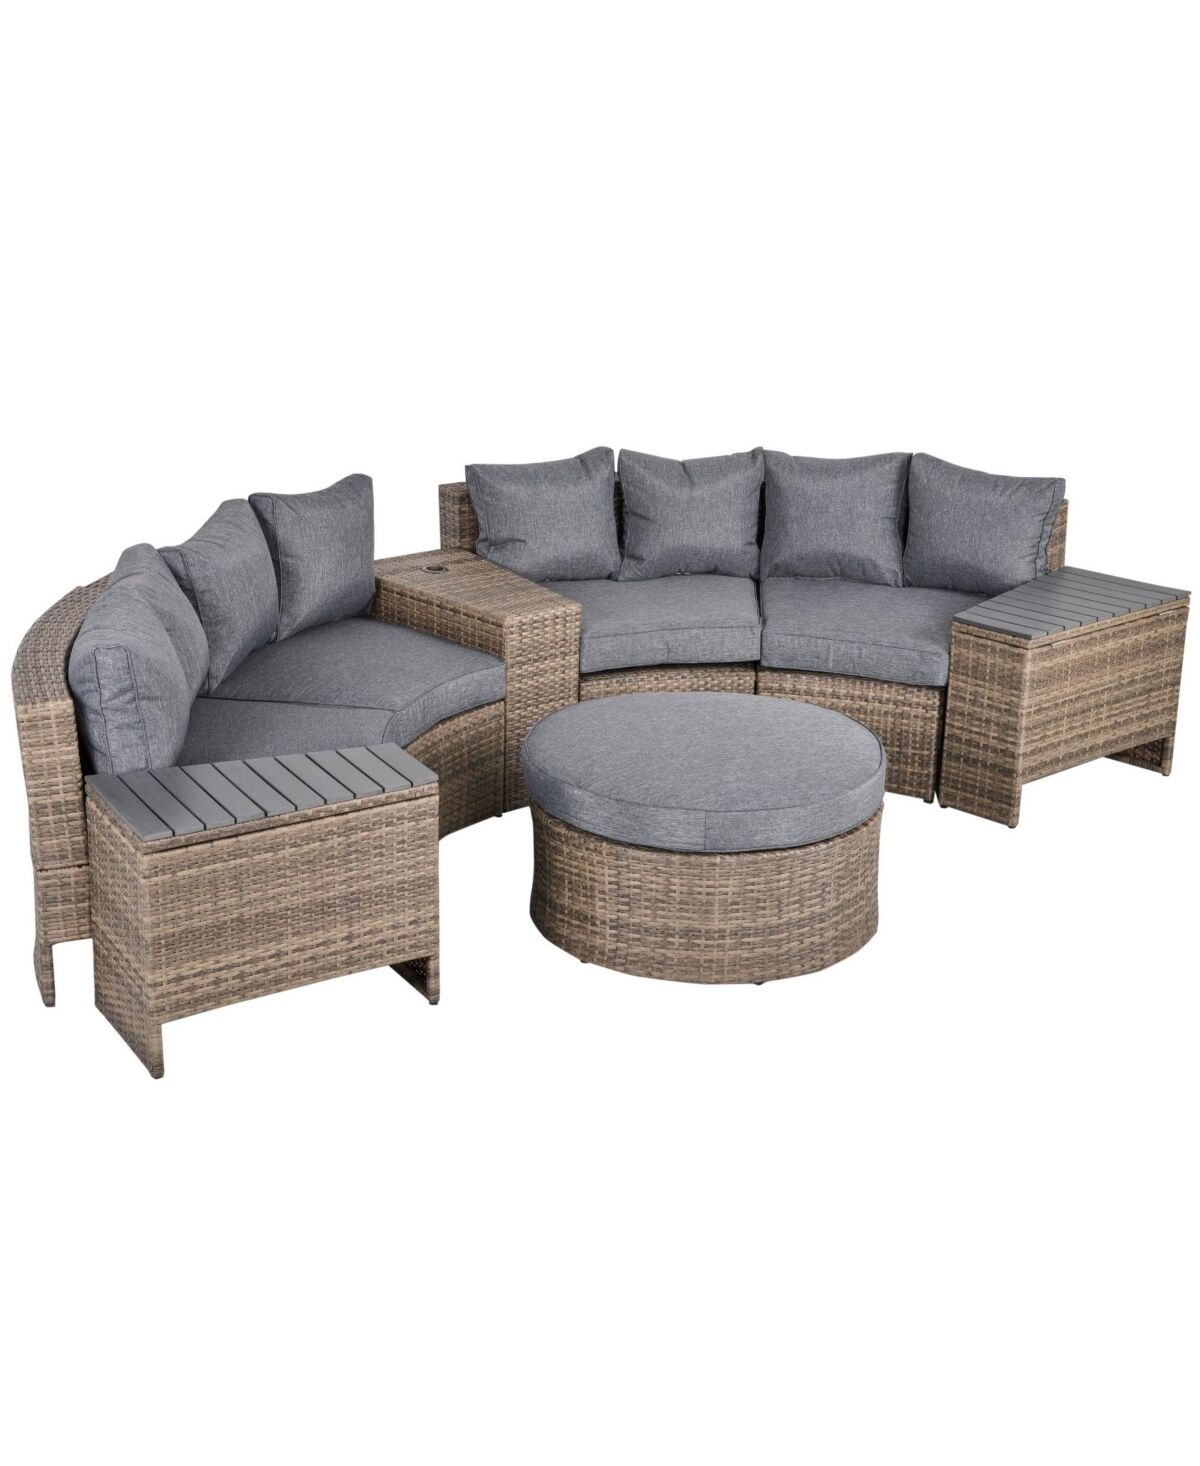 Outsunny 8 Piece Outdoor Rattan Sofa, Half Round Patio Furniture Set with Side Tables, Umbrella Hole, and Cushions, Grey - Grey